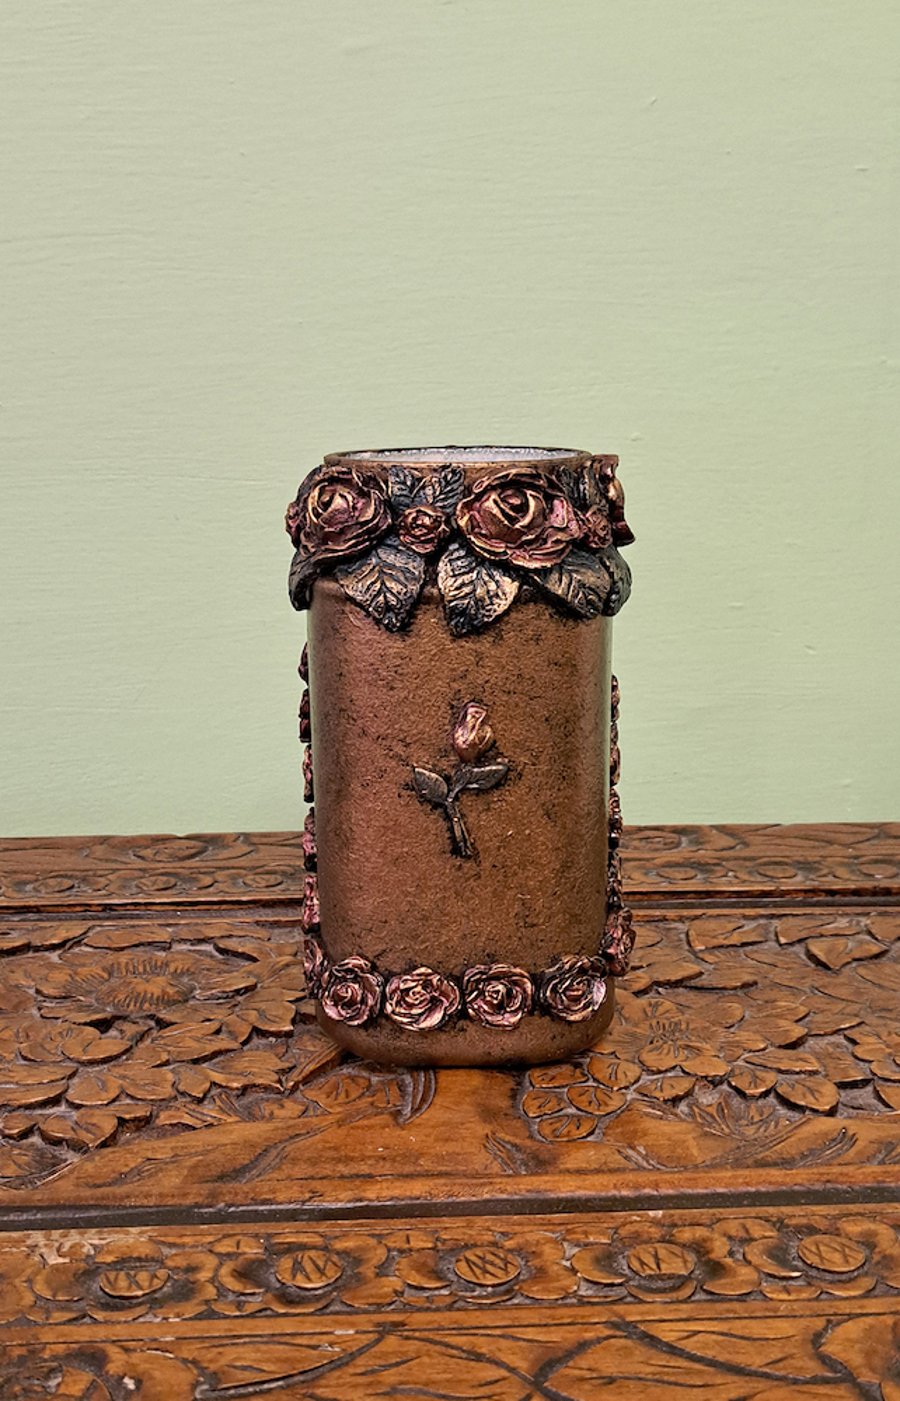 Handcrafted vase. Bronze with dark red roses. From upcycled jar & air dry clay